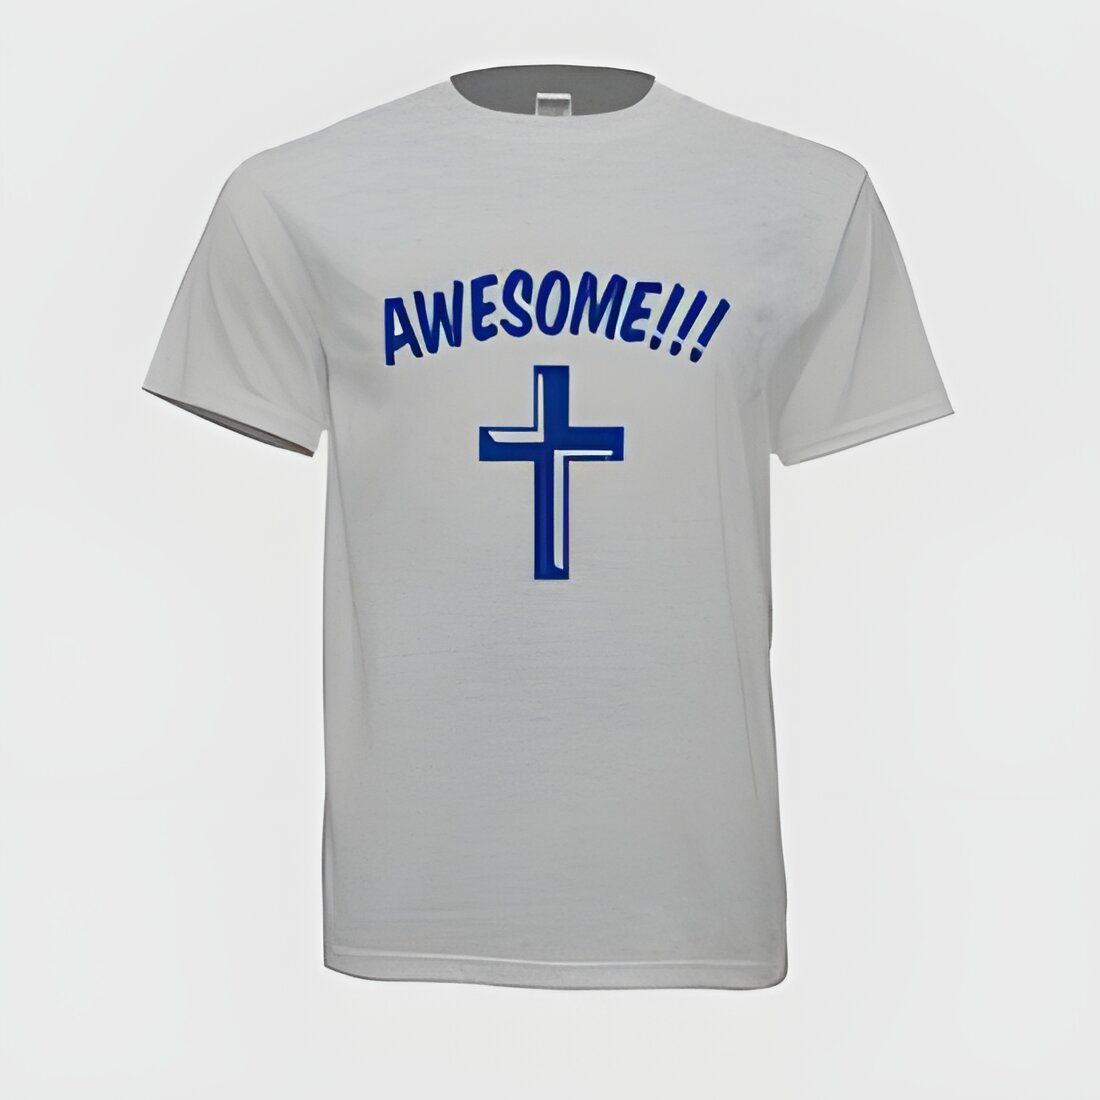 Free Awesome T-Shirt